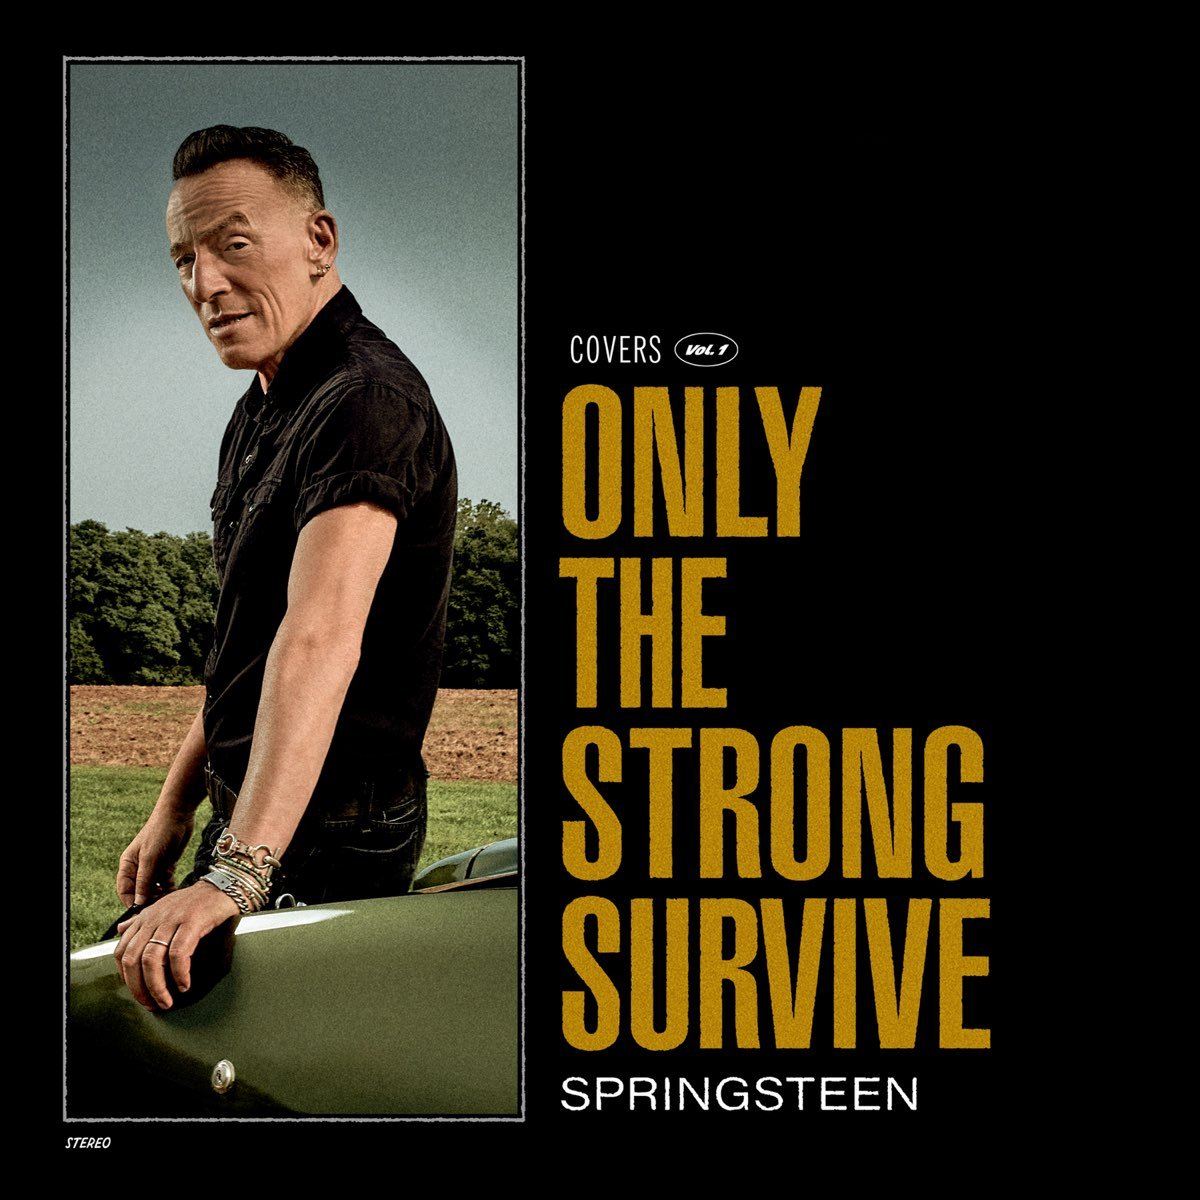 Bruce Springsteen | 'Only the Strong Survive'